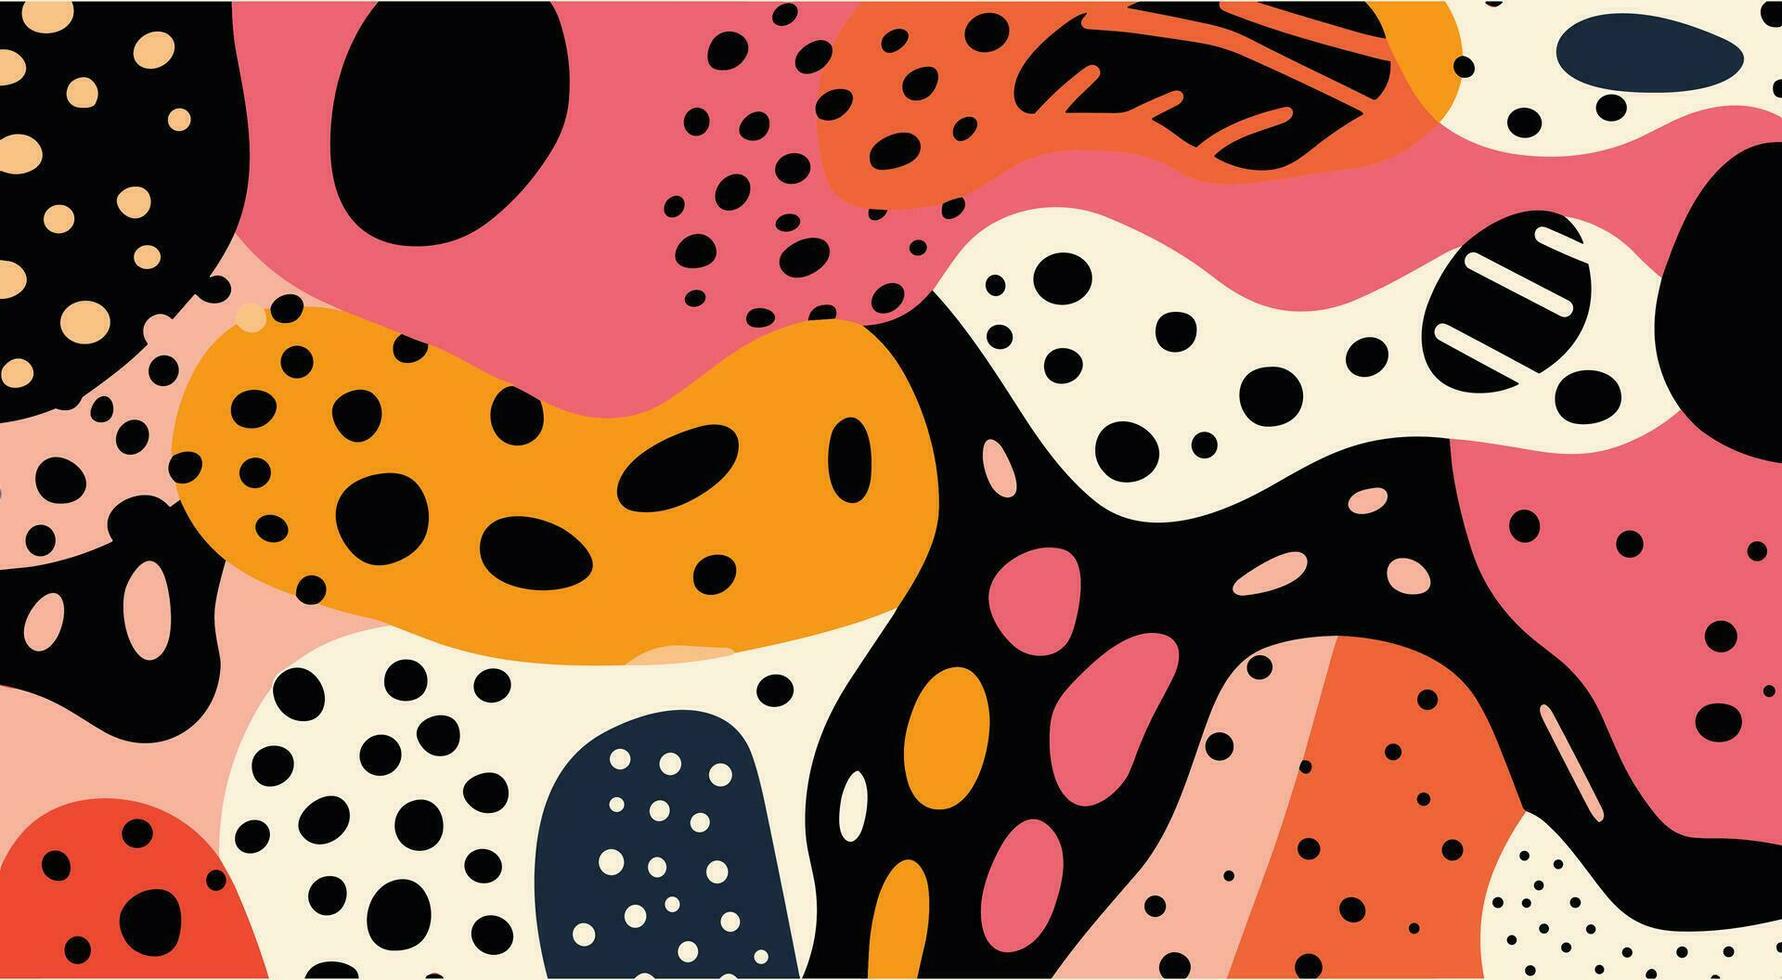 cute abstract patterns, colorful abstract patterns, abstract background, abstract patterns, abstract texture, abstract patterns, in the style of black and beige, playful pop art-inspired designs vector